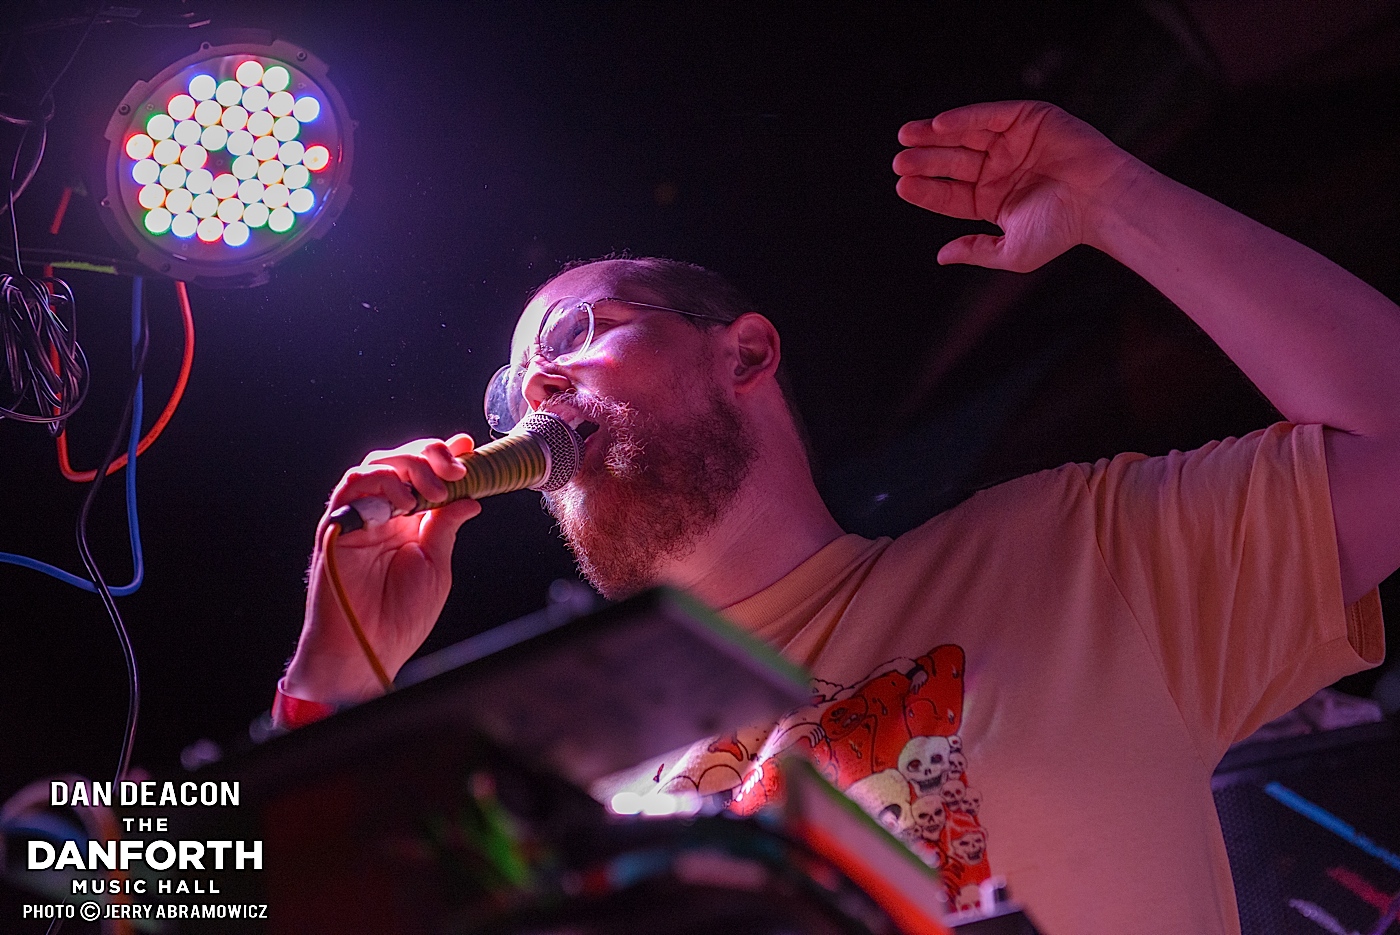 DAN DEACON opens for Animal Collective at The Danforth Music Hall Toronto.